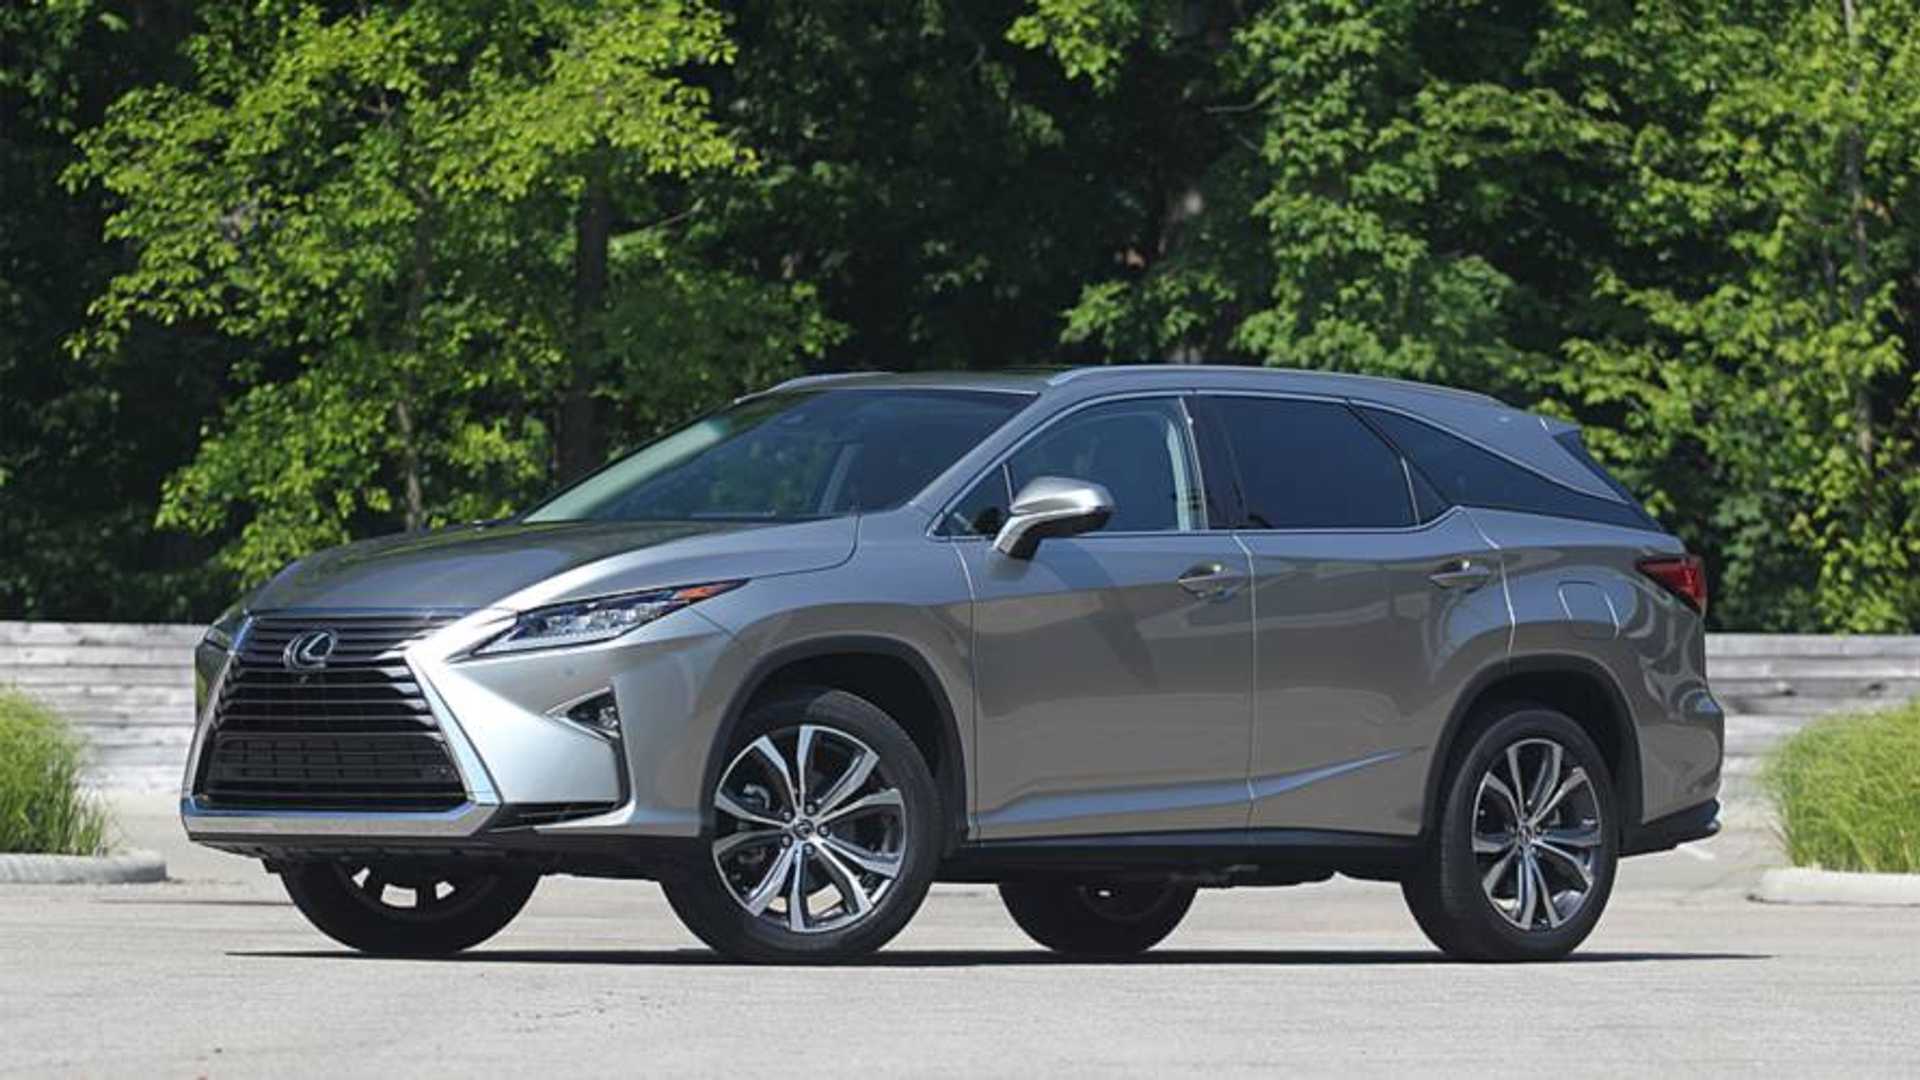 2018 Lexus RX 350L Review: More Junk In Its Trunk